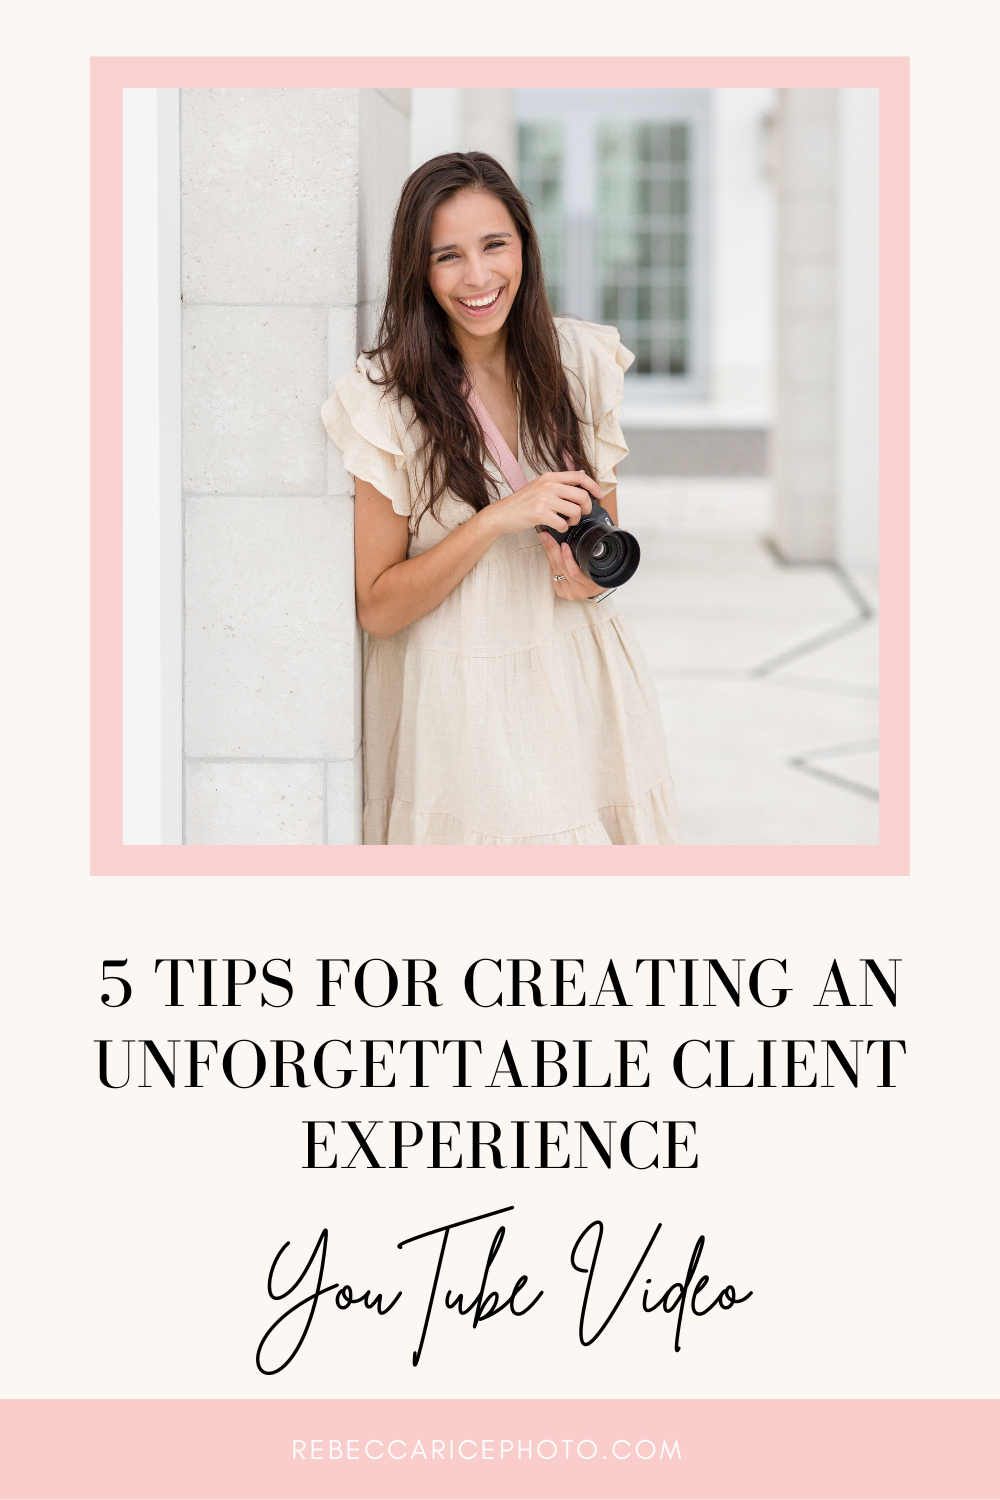 5 Tips for Creating an Unforgettable Client Experience!